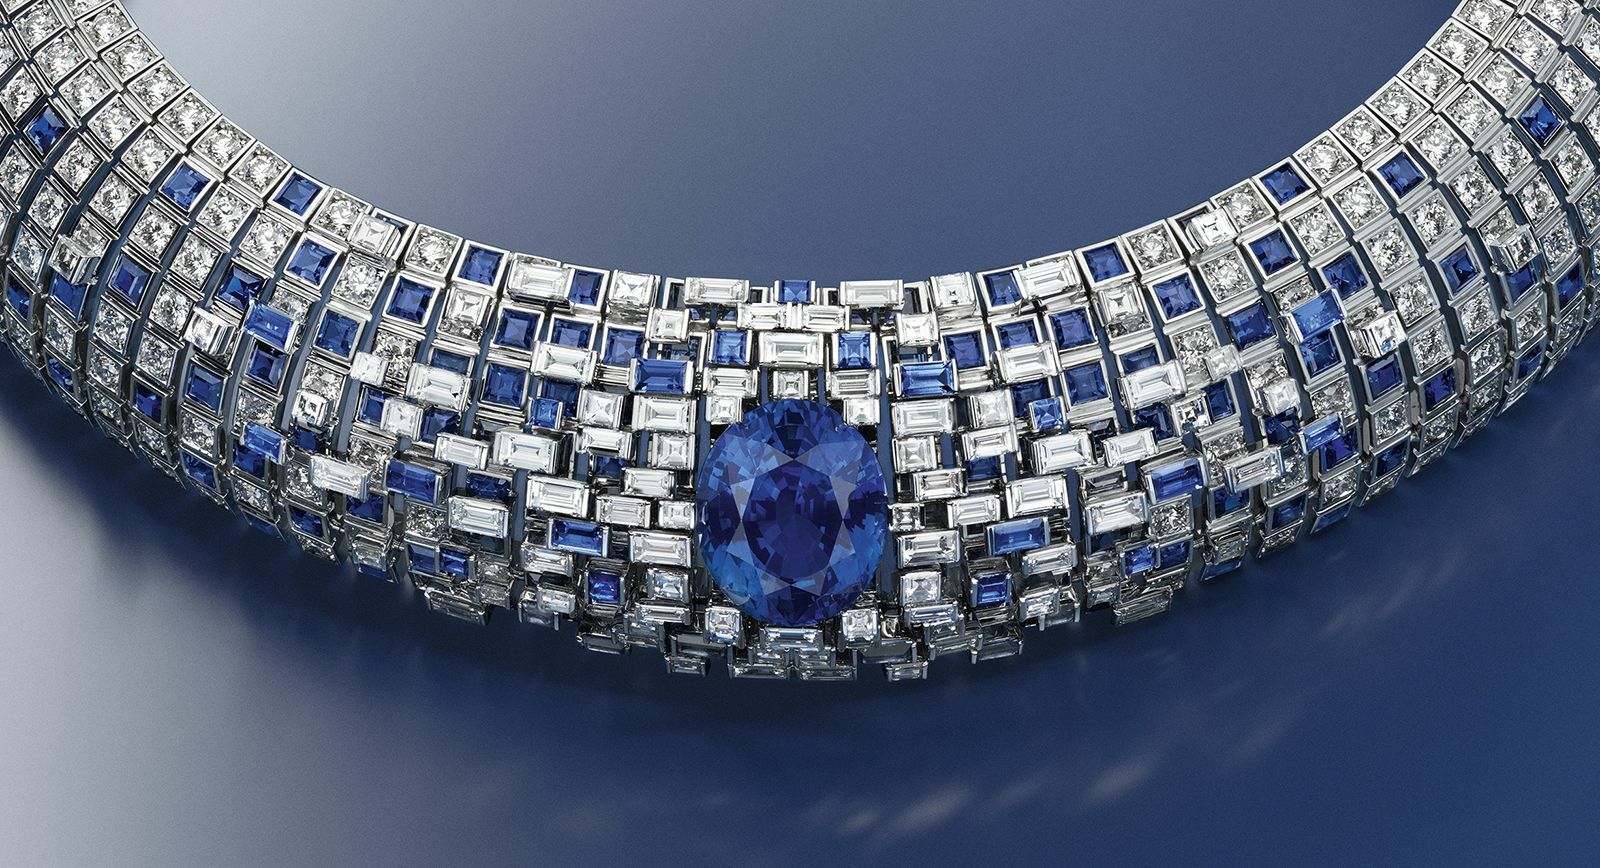 Louis Vuitton Stellar Times Lune sapphire and diamond high jewellery necklace